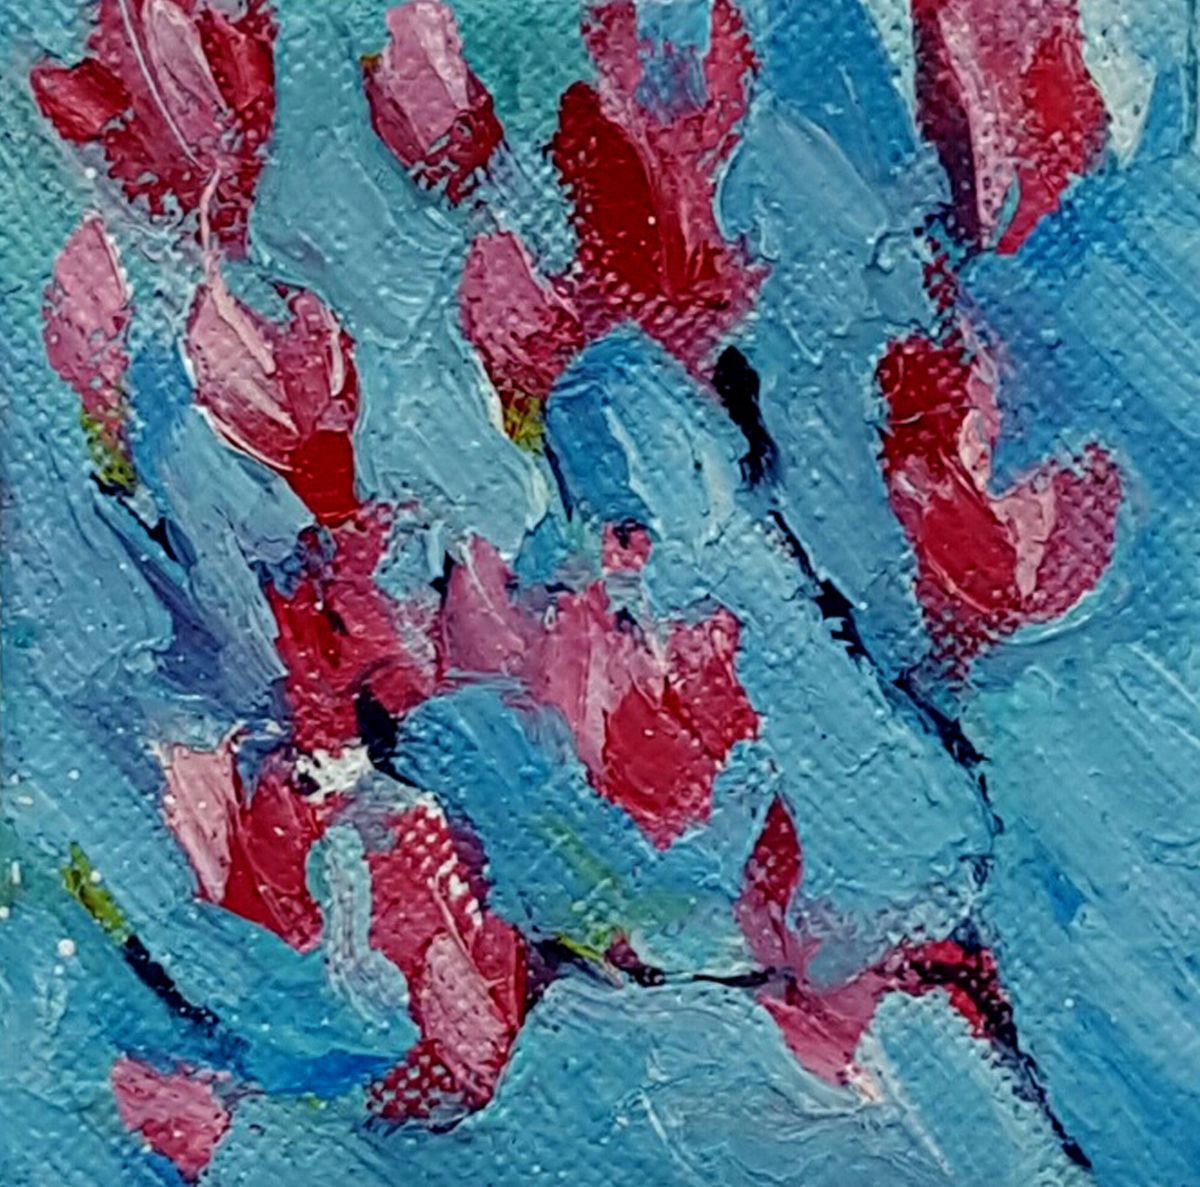 Magnolia Delight in a blue sky by Niki Purcell - Irish Landscape Painting